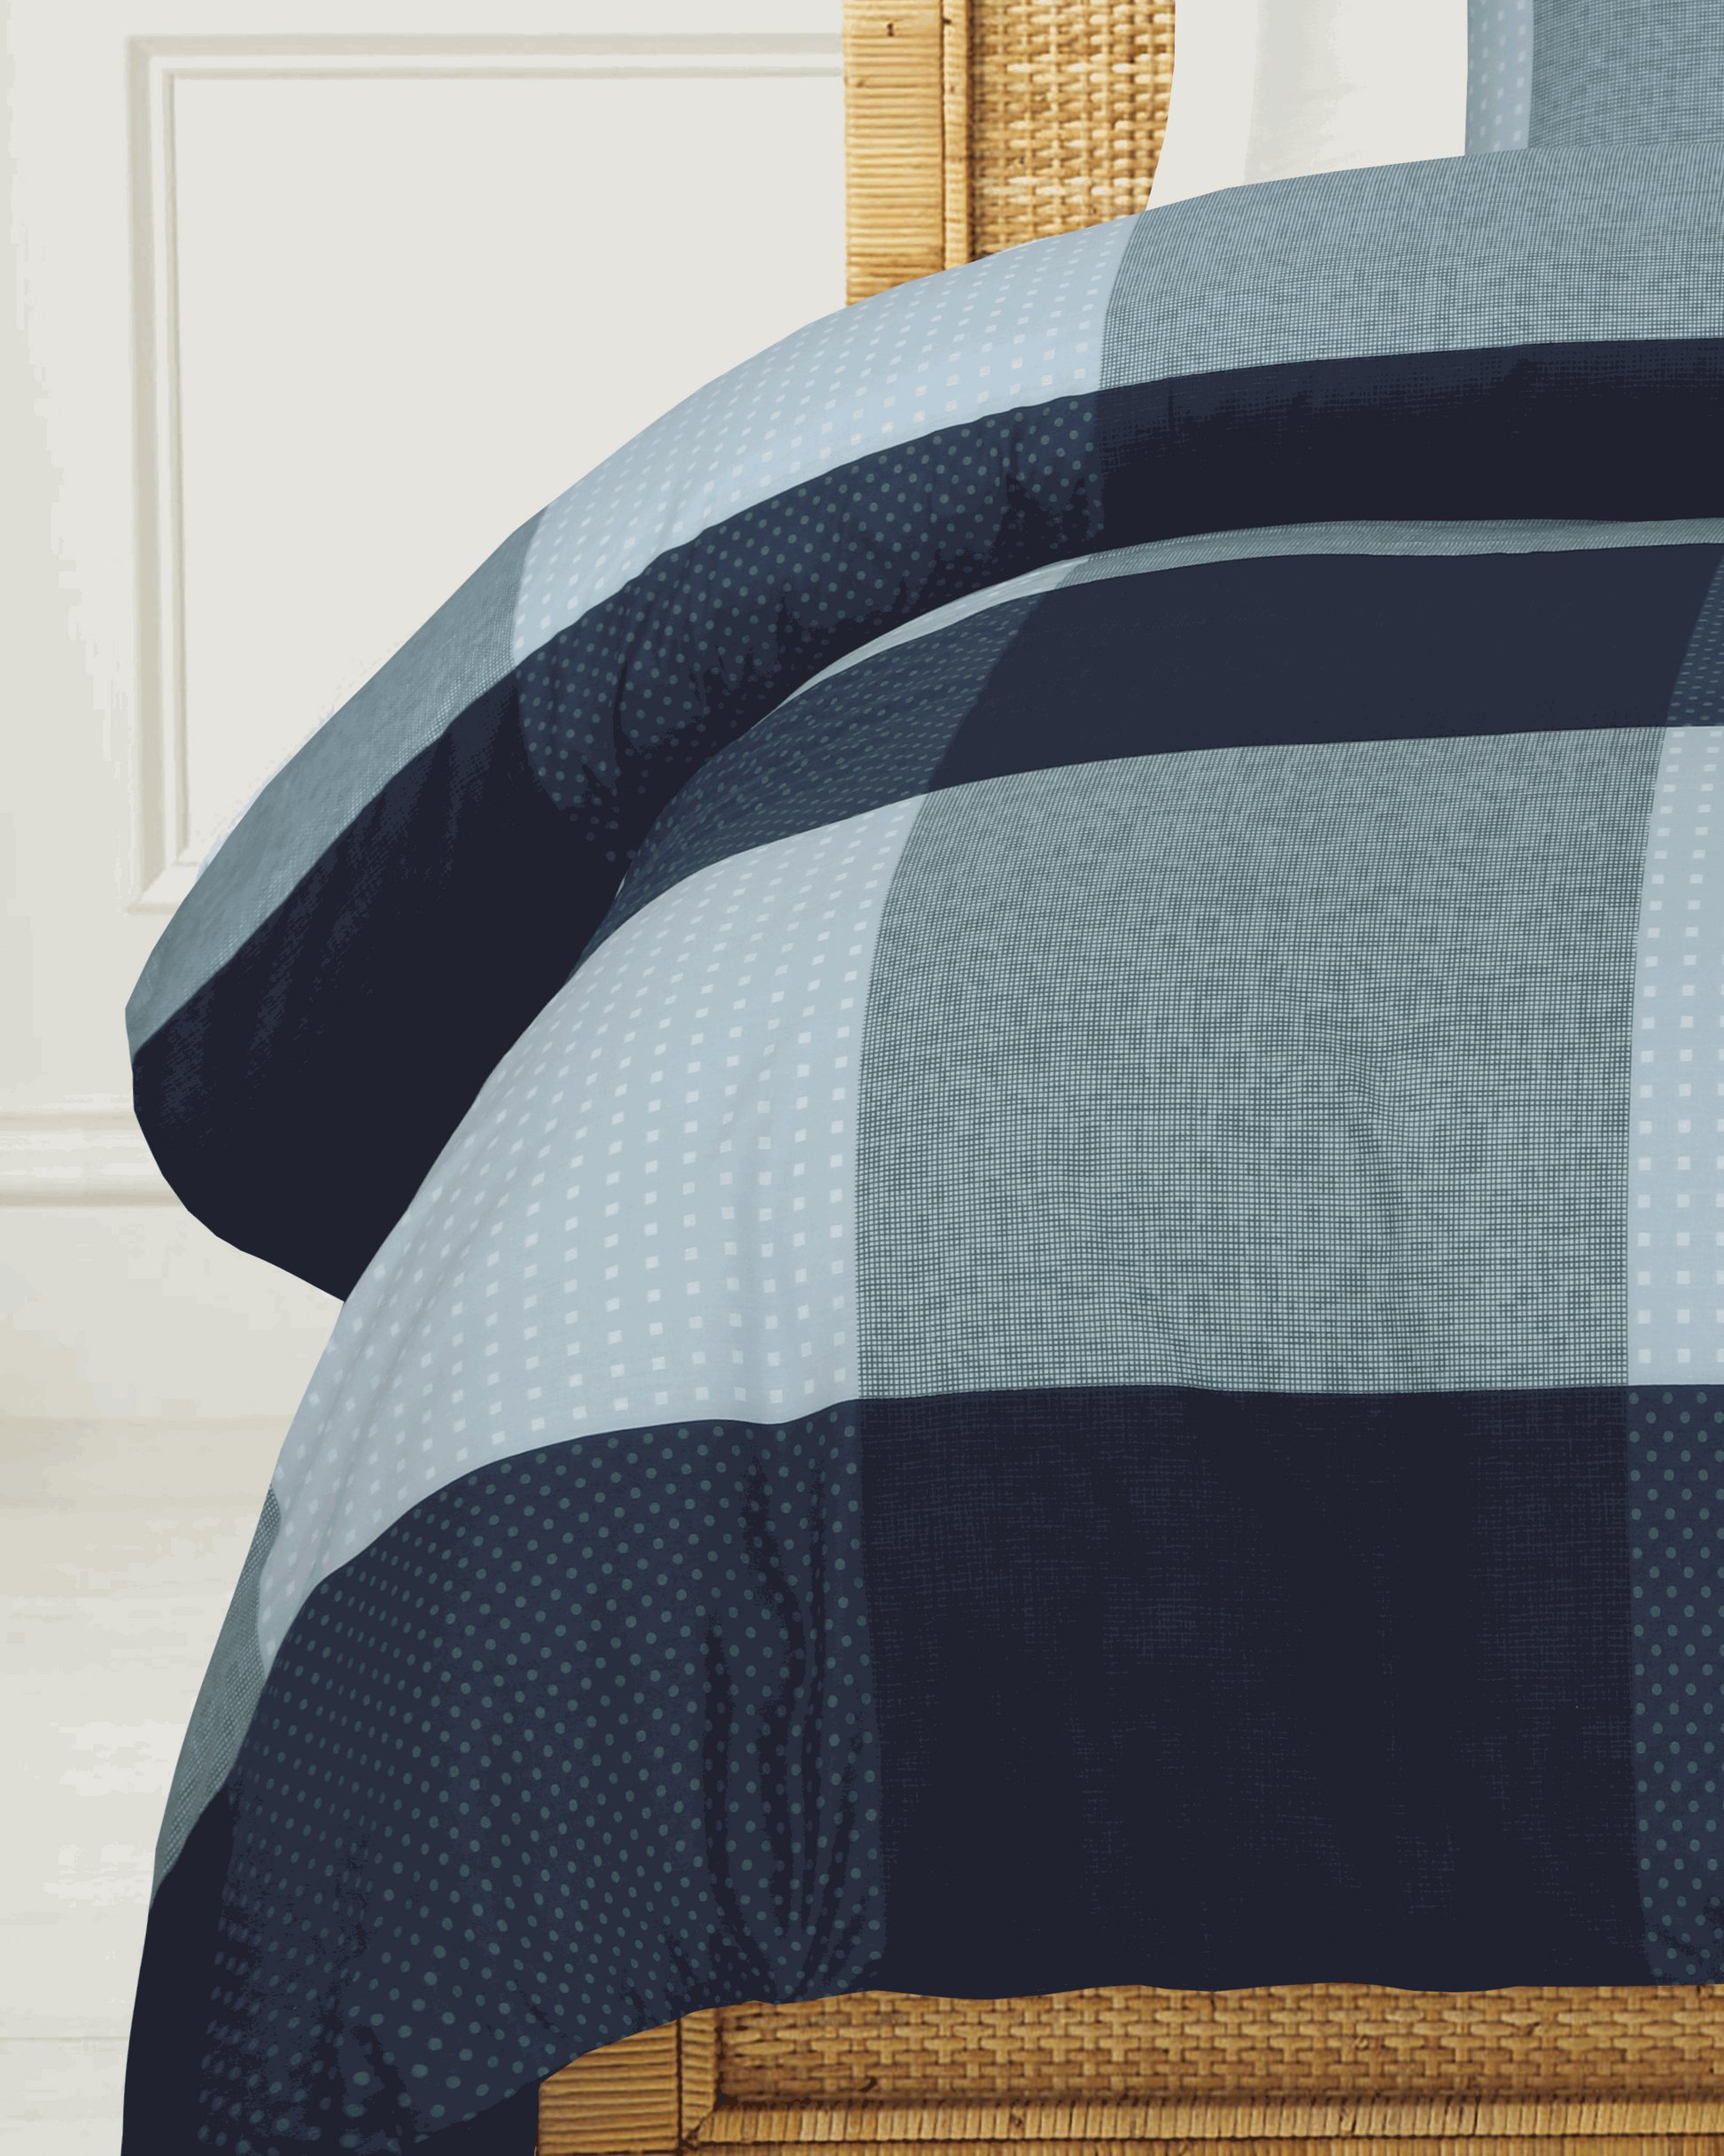 Doona Cover with Extra Standard Pillow Covers | Blue Box